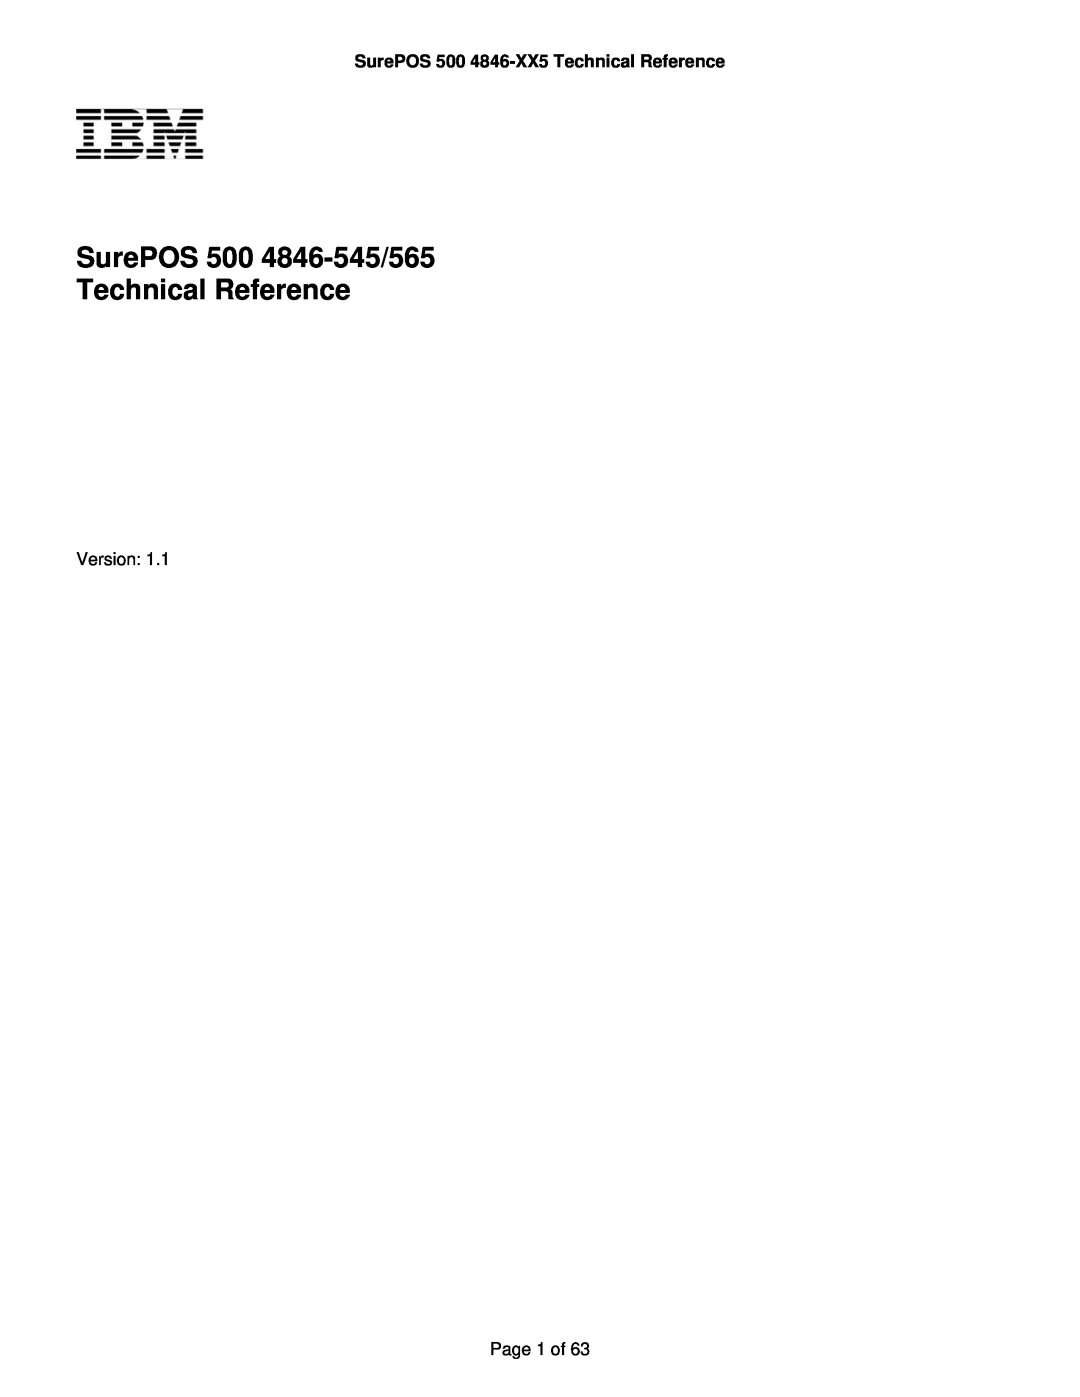 IBM manual SurePOS 500 4846-545/565 Technical Reference, SurePOS 500 4846-XX5 Technical Reference 